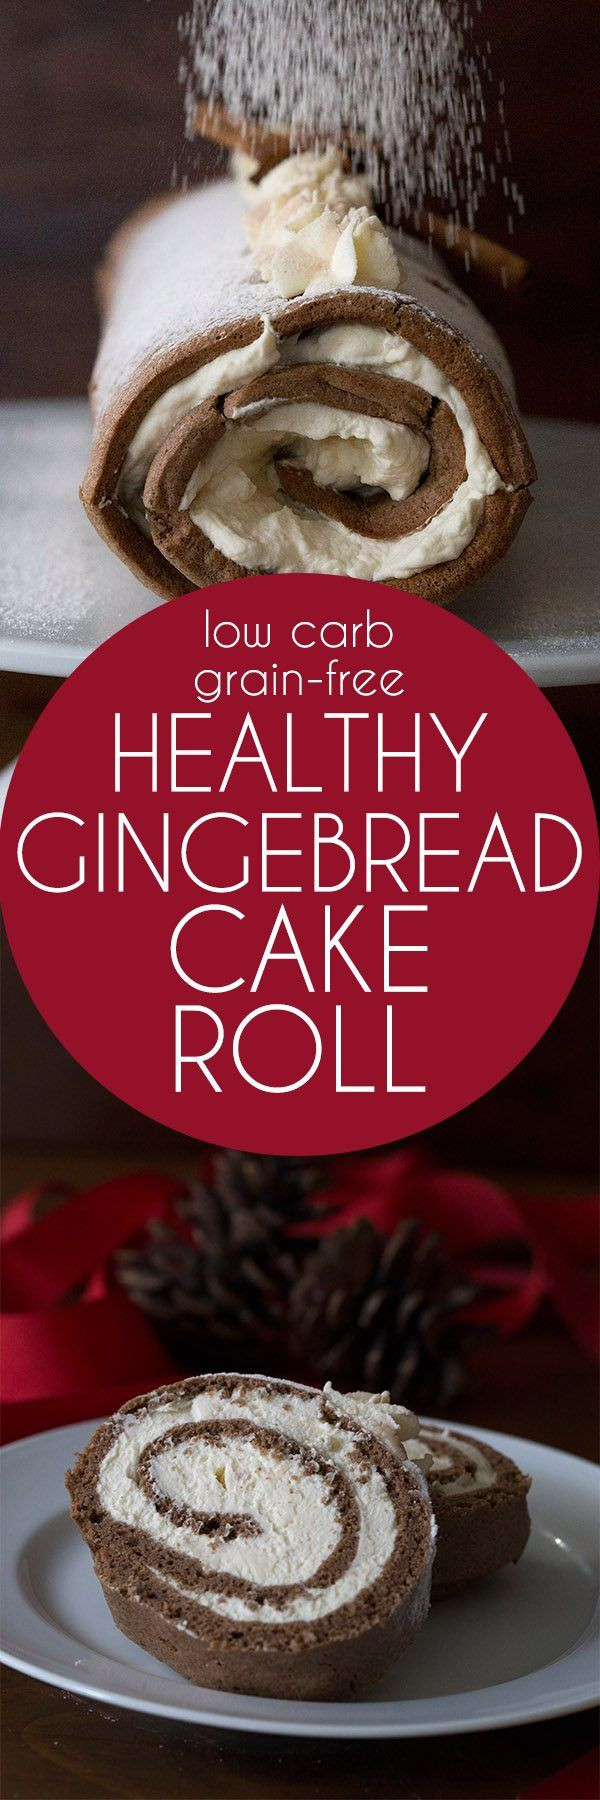 Low Carb Holiday Desserts
 Ginggerbread Cake Roll